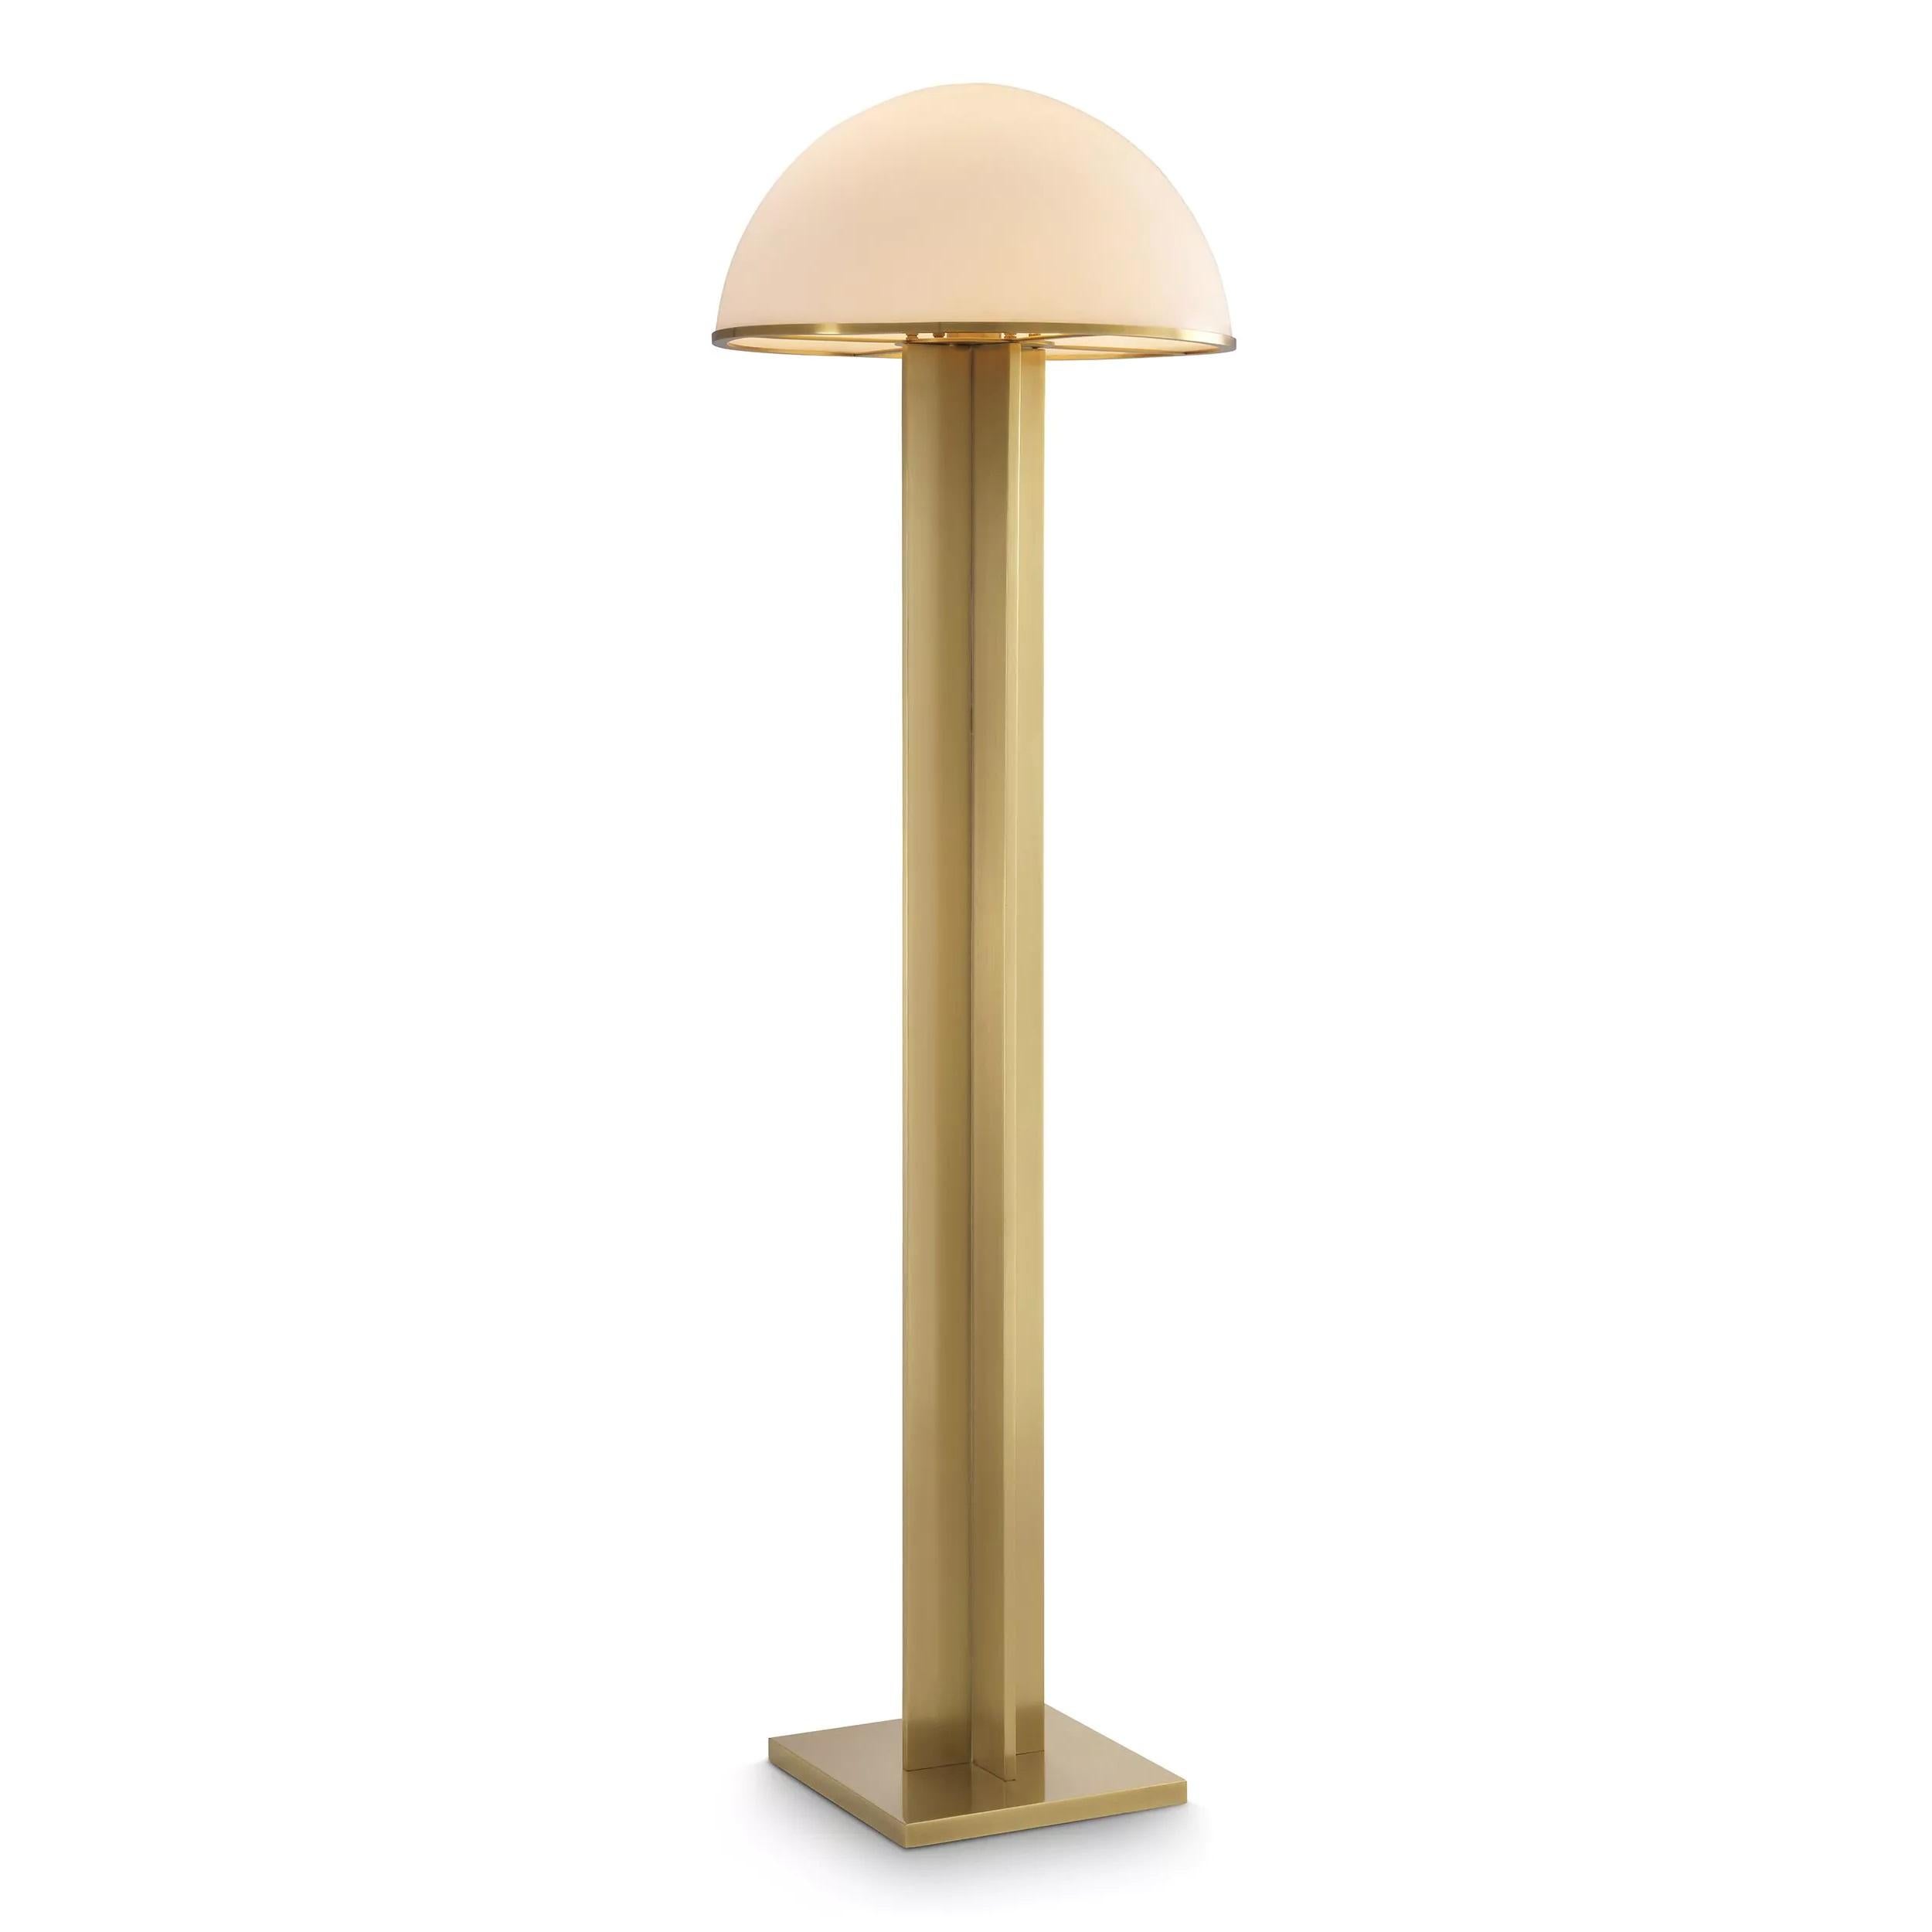 Contemporary 1920s Design and Art Deco Style Brass and White Opaline Glass Floor Lamp For Sale